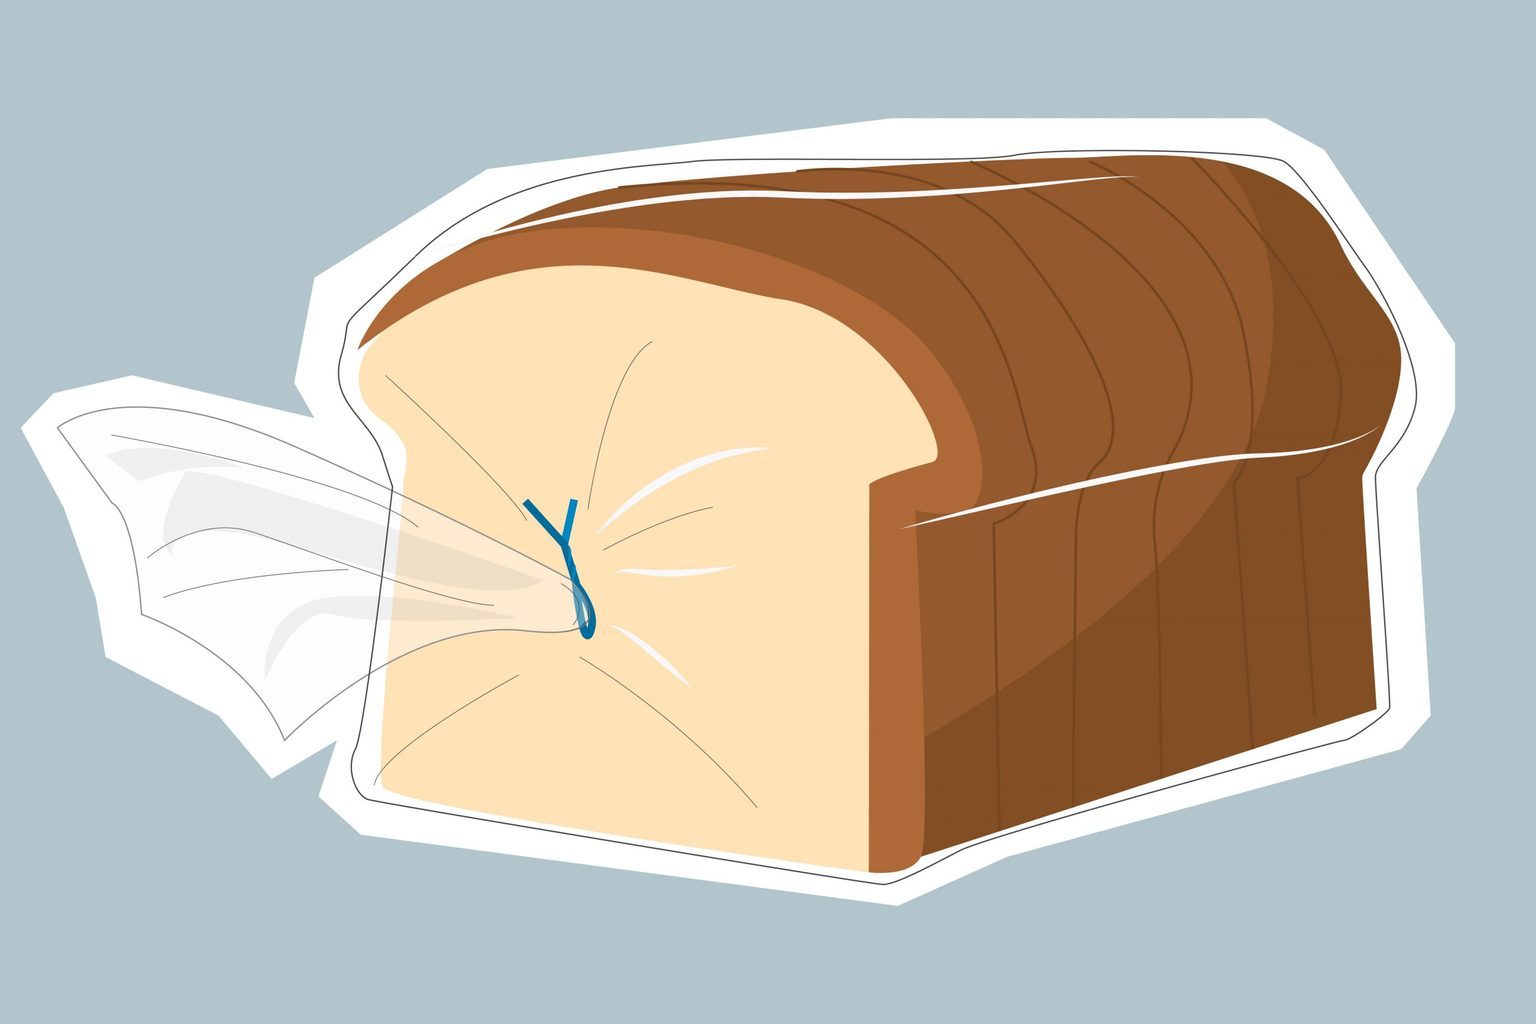 How to Draw a Loaf of Bread Real Easy